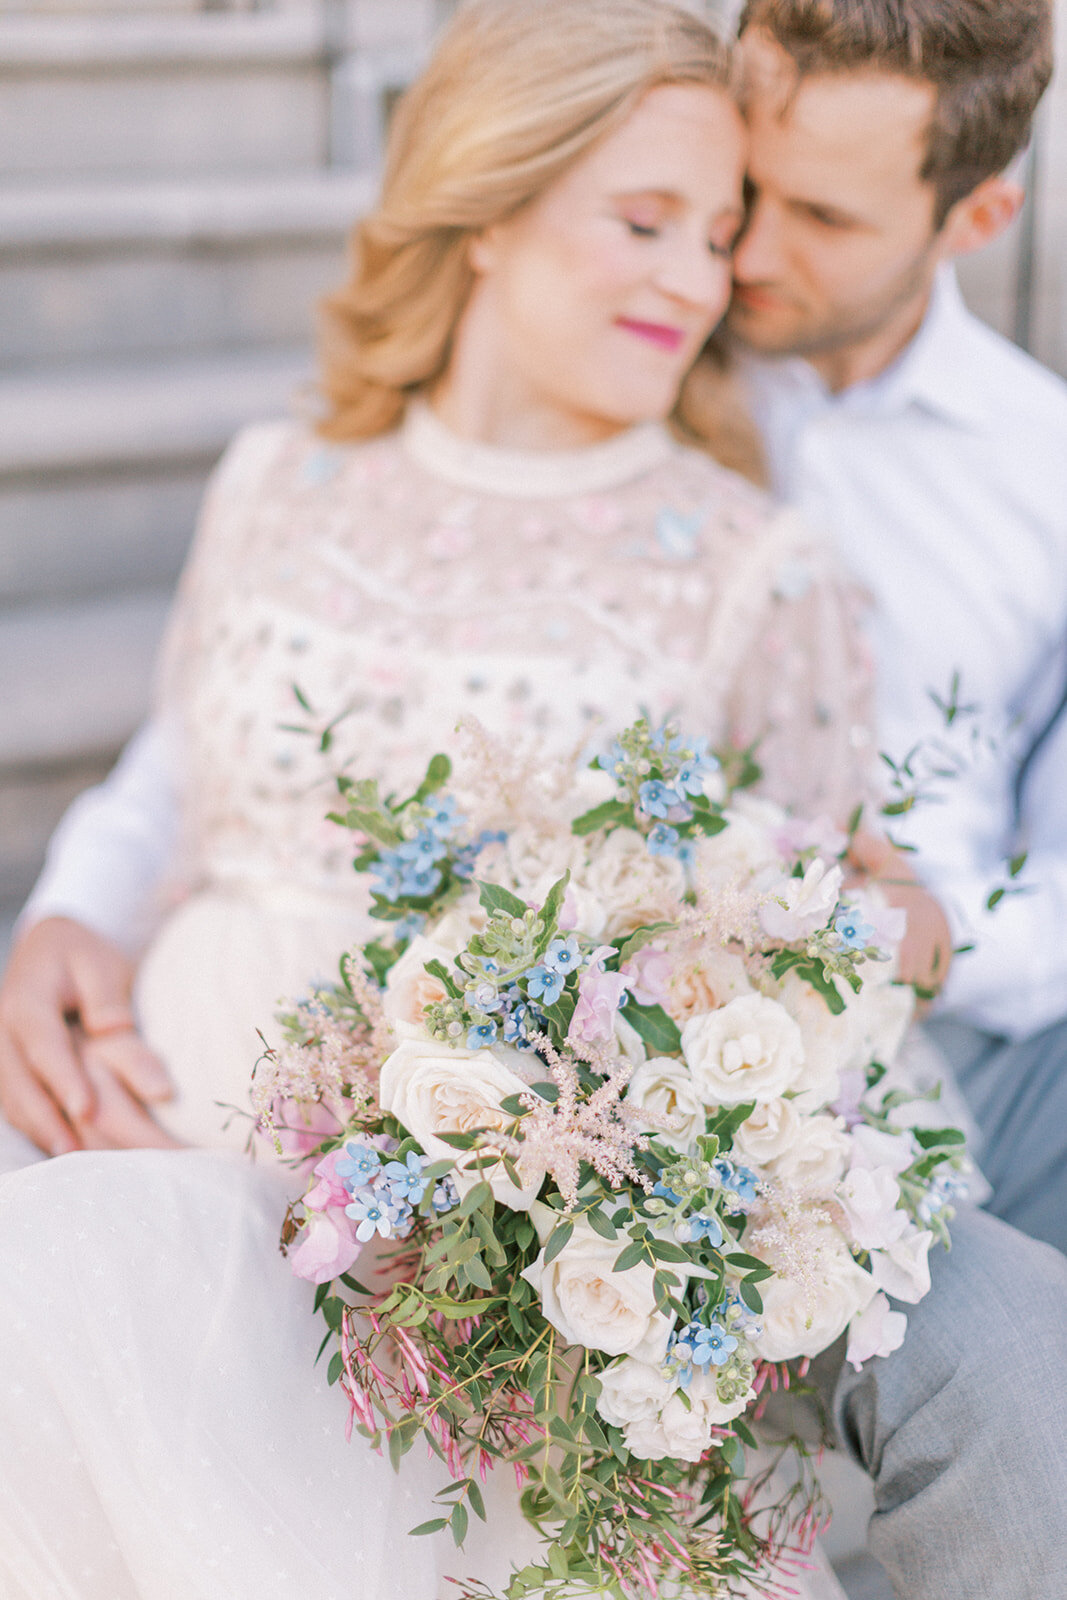 Expecting mother sits and leans into her husband as she holds a bouquet of flowers.